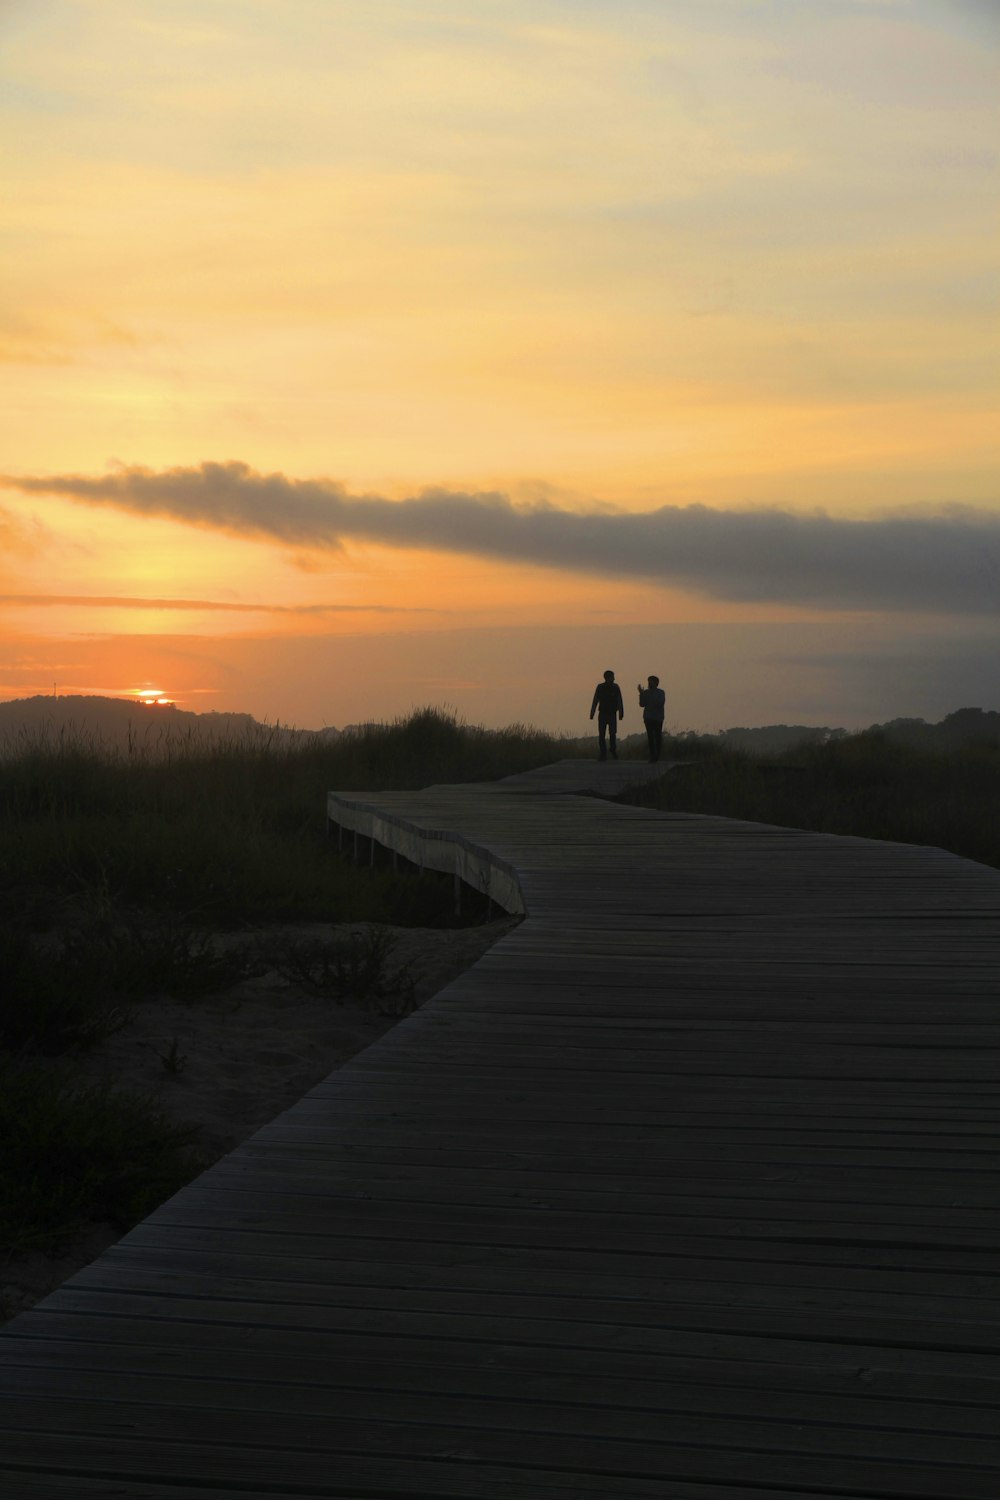 silhouette of 2 person walking on pathway during sunset